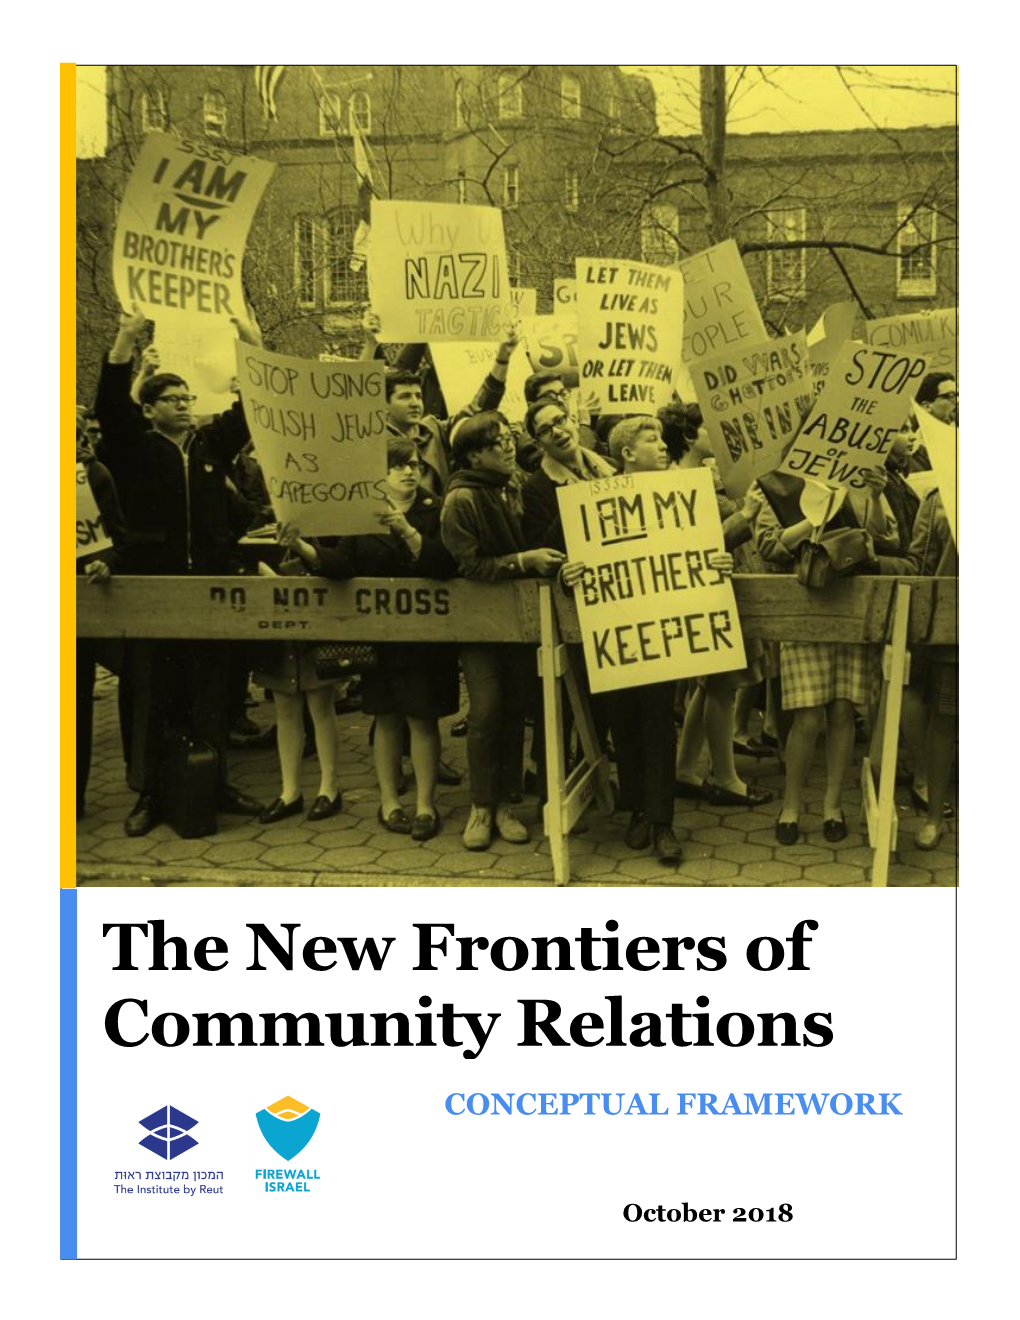 The New Frontiers of Community Relations